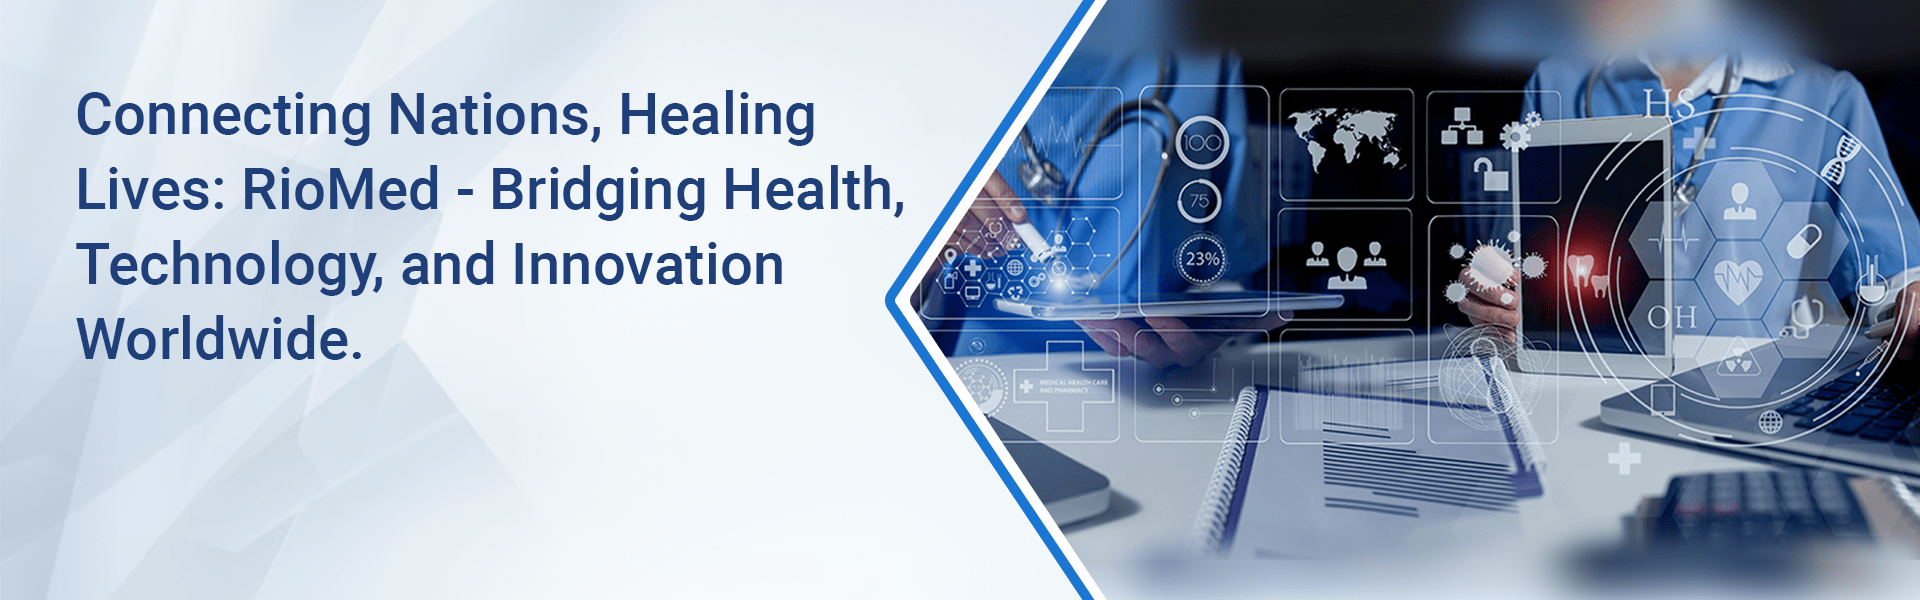 RioMed Bridging Health Technology and Innovation Worldwide